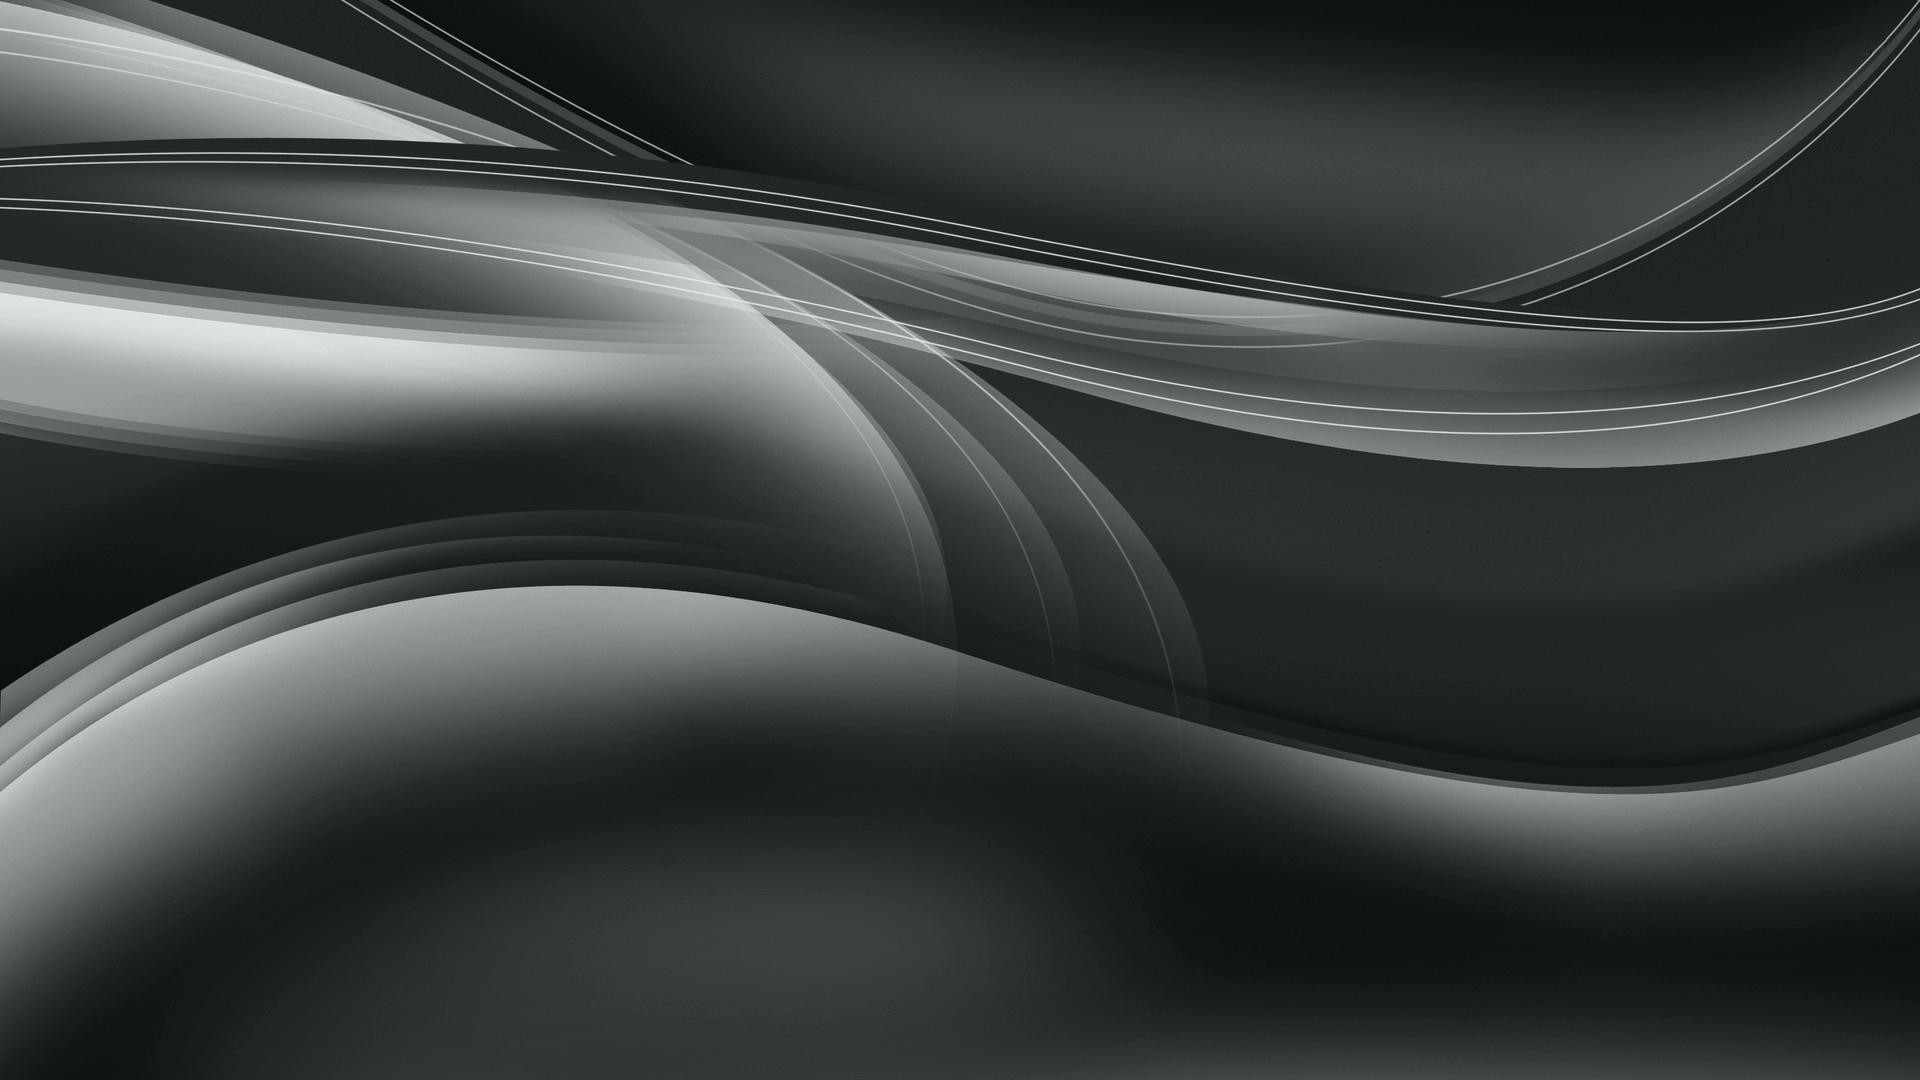 1920x1080 Silver Curves Hd Abstract Wallpaperblack White And Pink Flower Wallpaper  Black